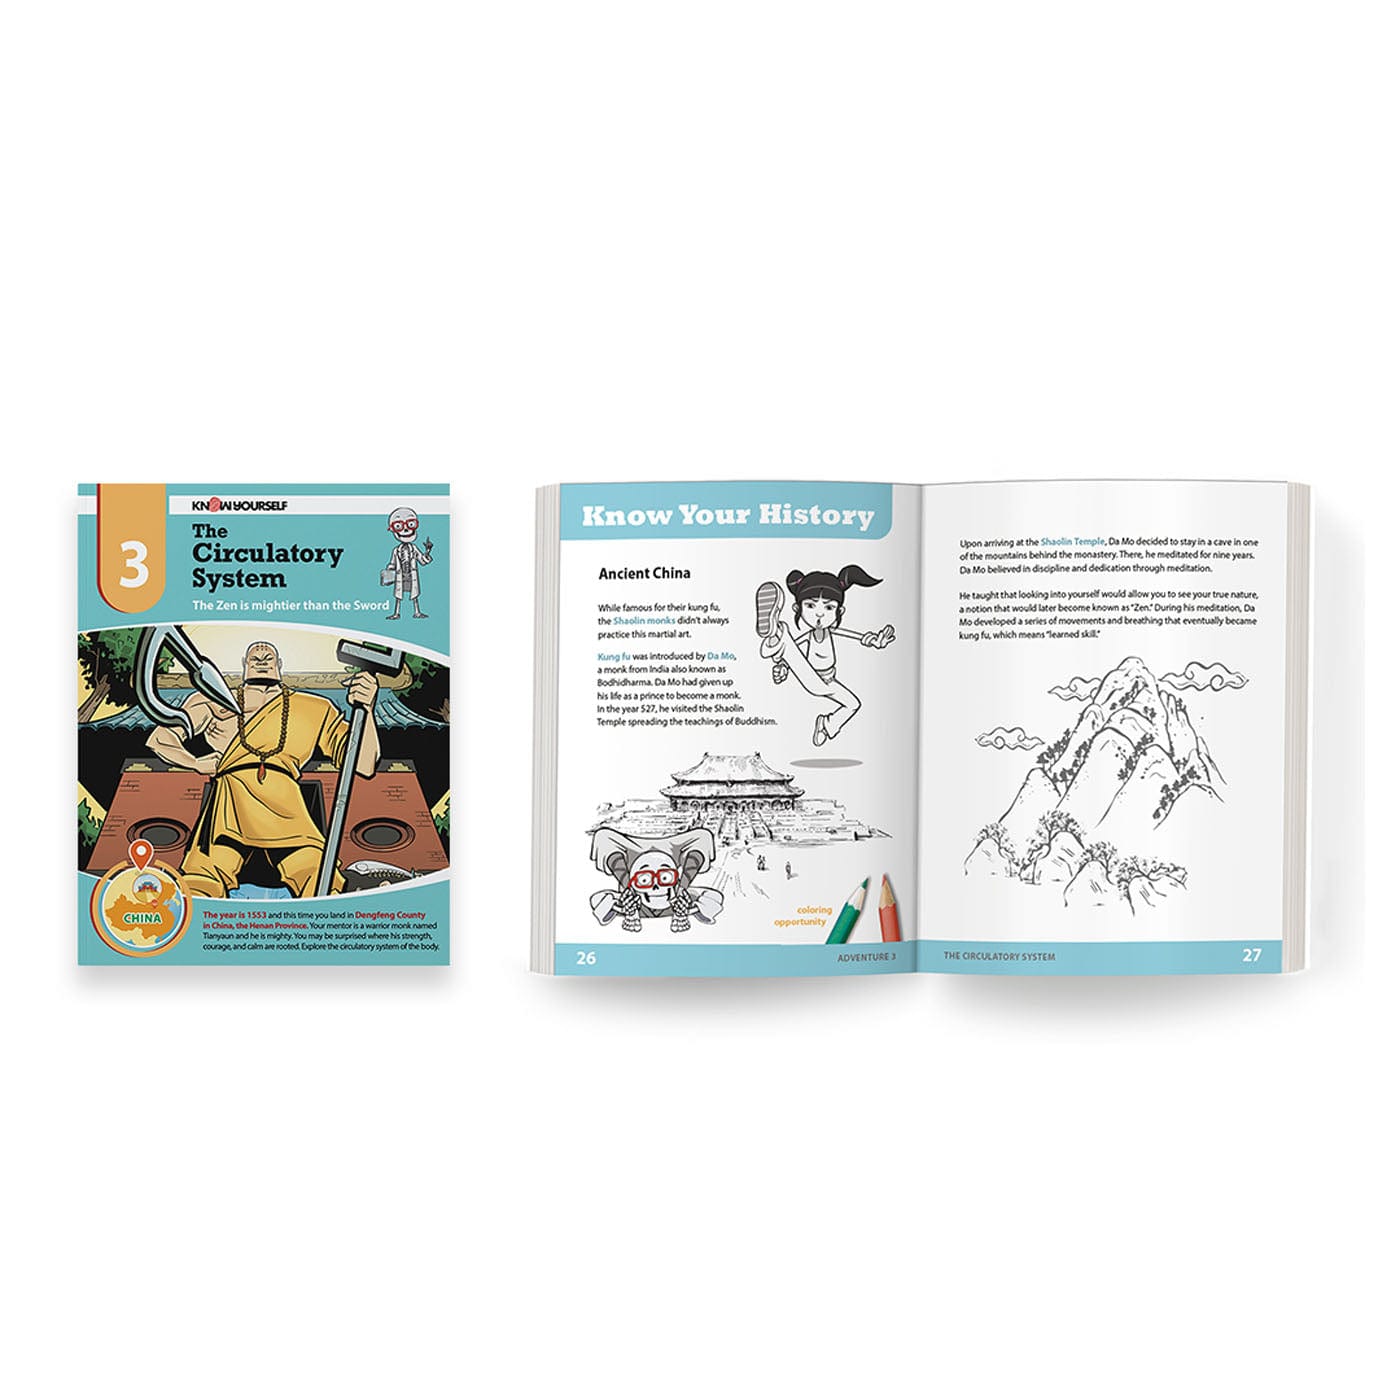 Systems of the Body: Adventure Series 12 Book Set Health Education for Children